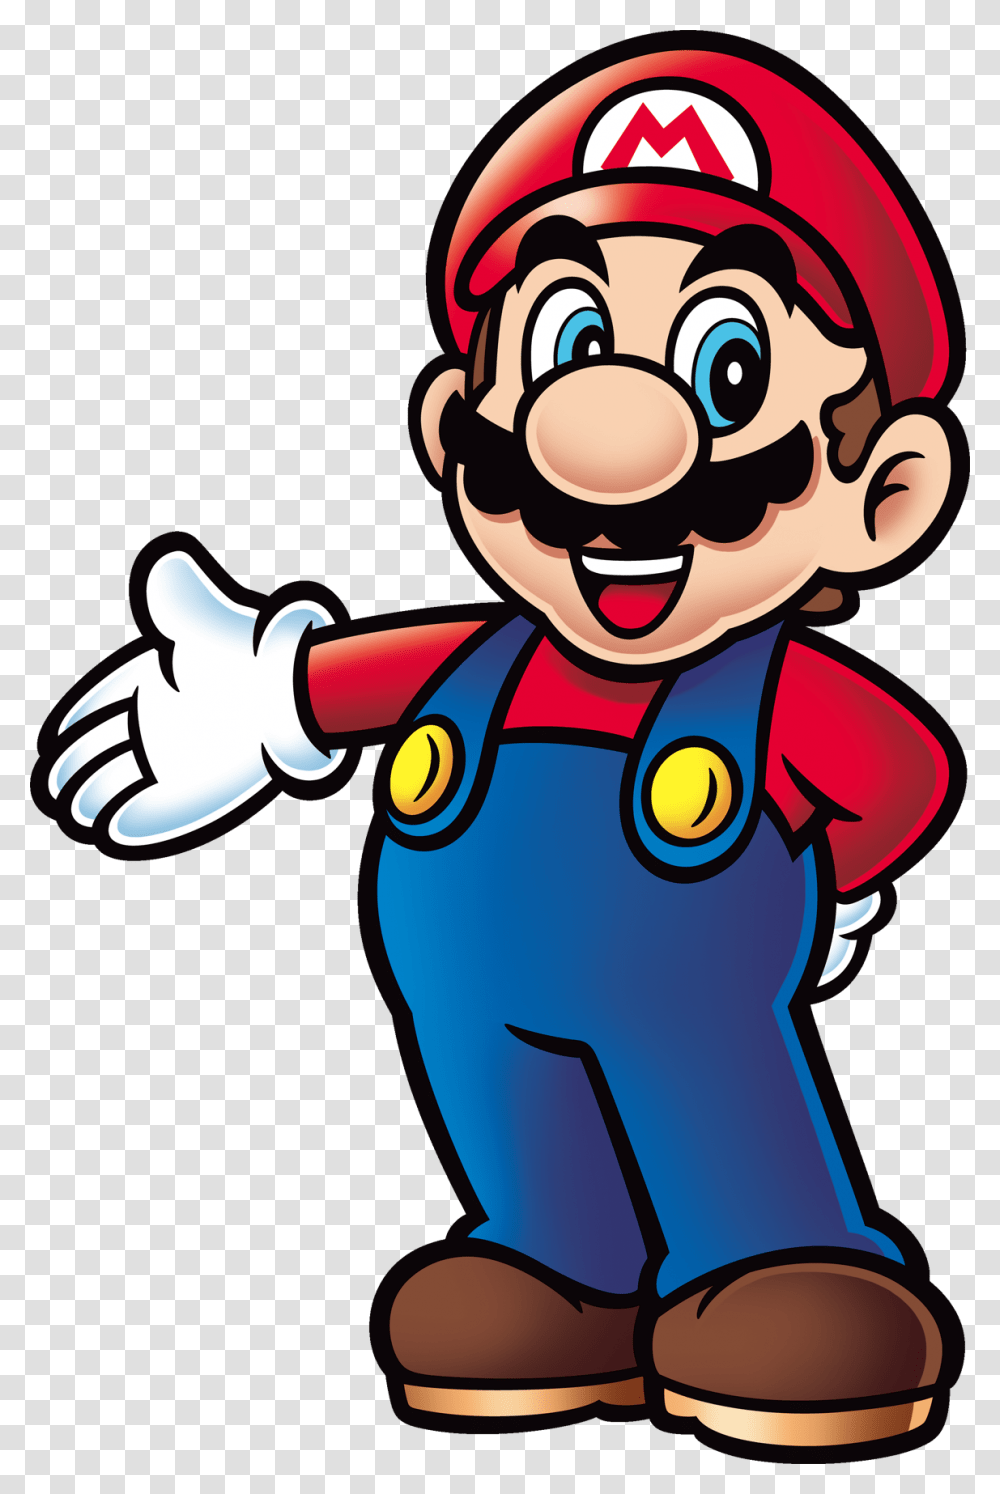 Come Here If You Have The Subscription, Performer, Hand, Super Mario Transparent Png